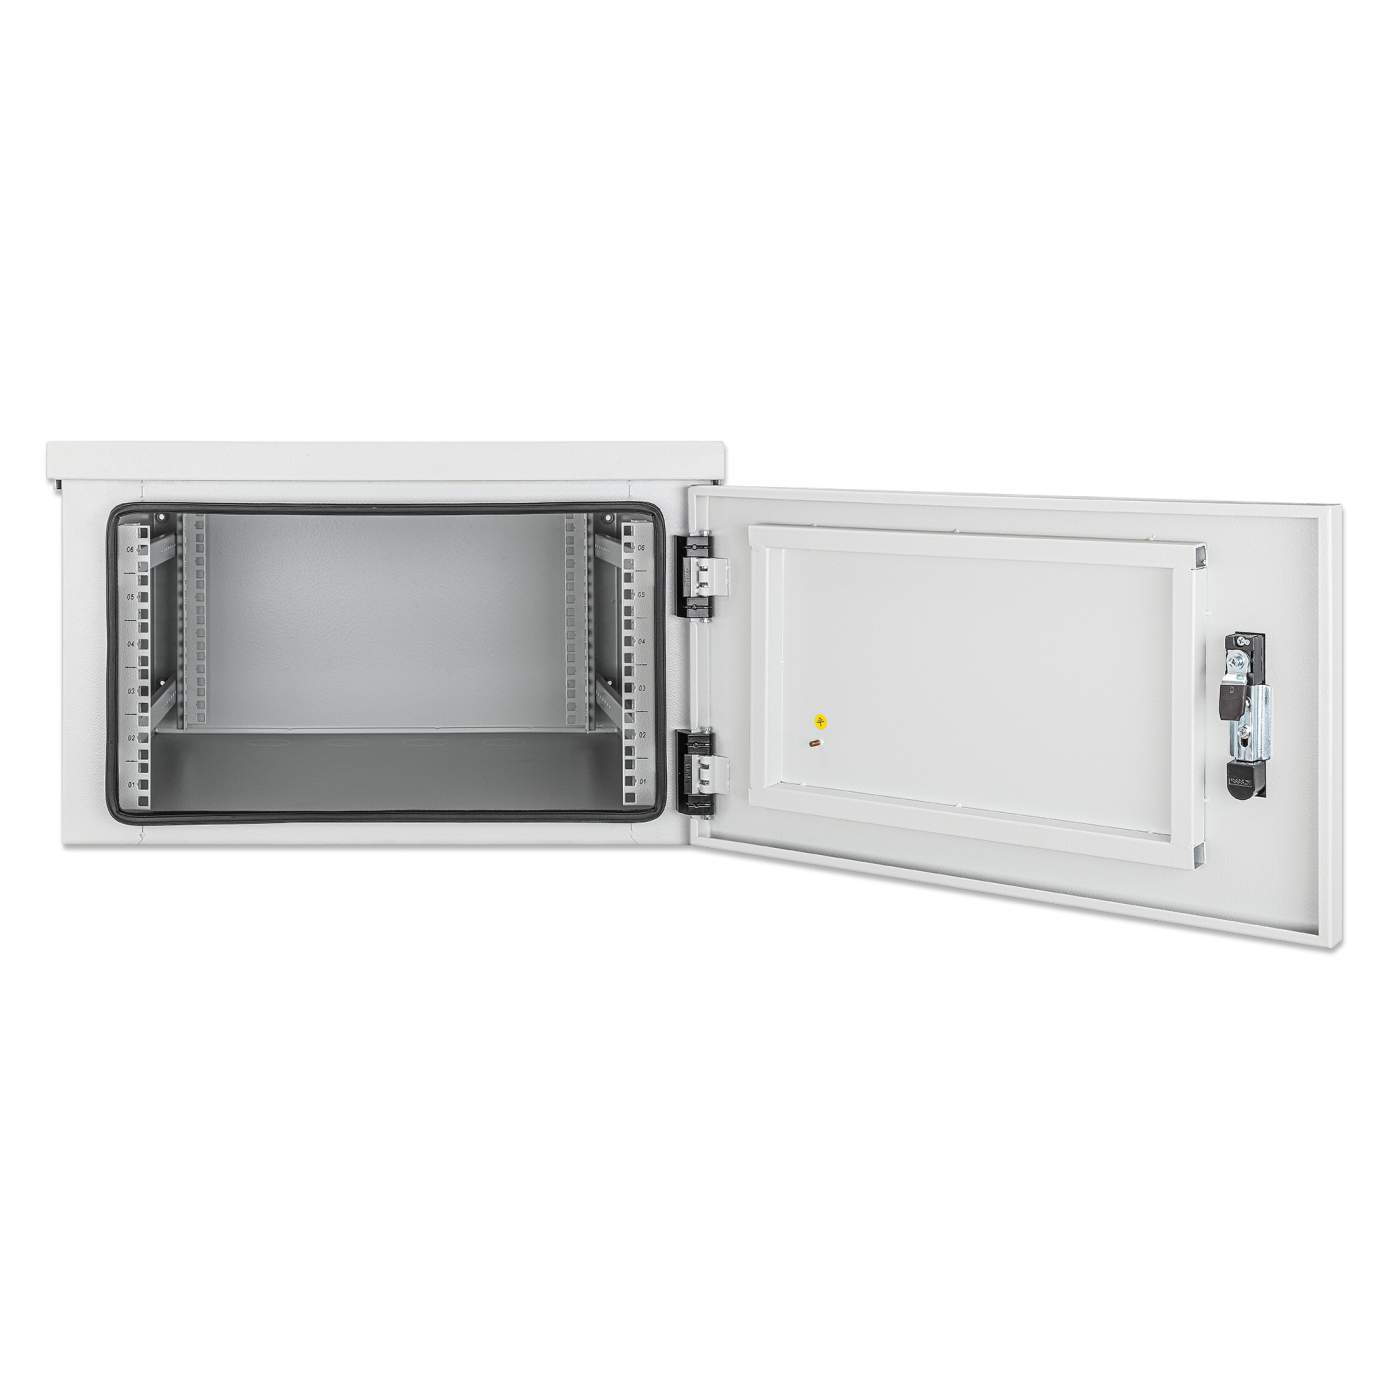 Industrial IP55 19" Wall Mount Cabinet with Integrated Fans, 6U  Image 5